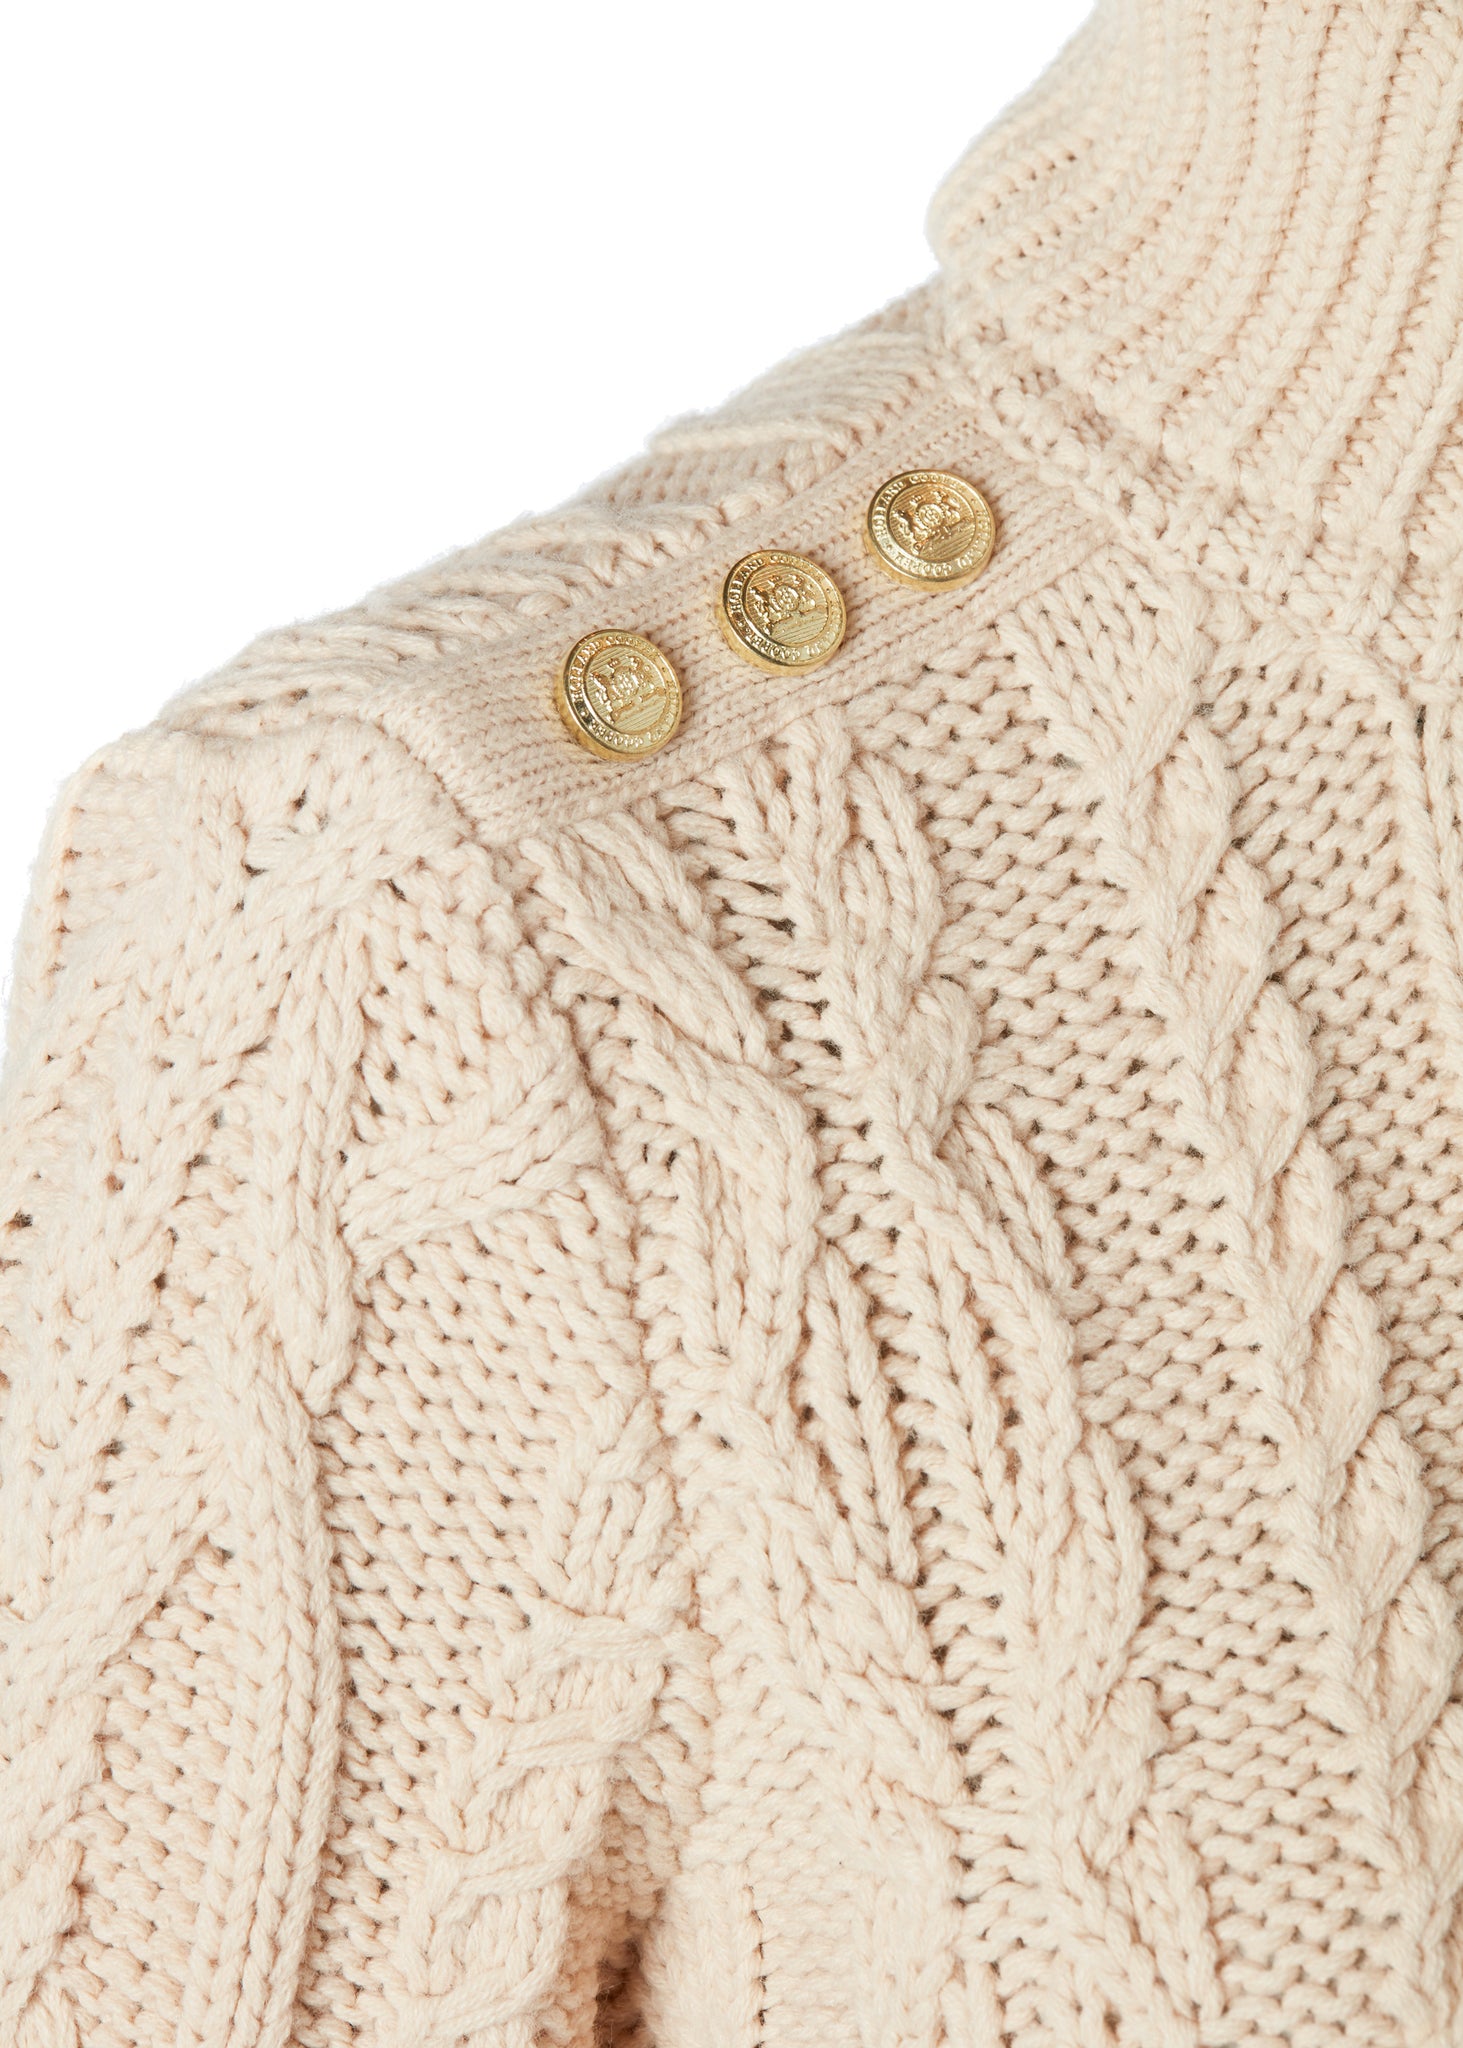 gold button detail accross shoulder of a chunky cable knit roll neck jumper in oatmeal with dropped shoulders and thick ribbed cable trims and gold buttons on cuffs and collar